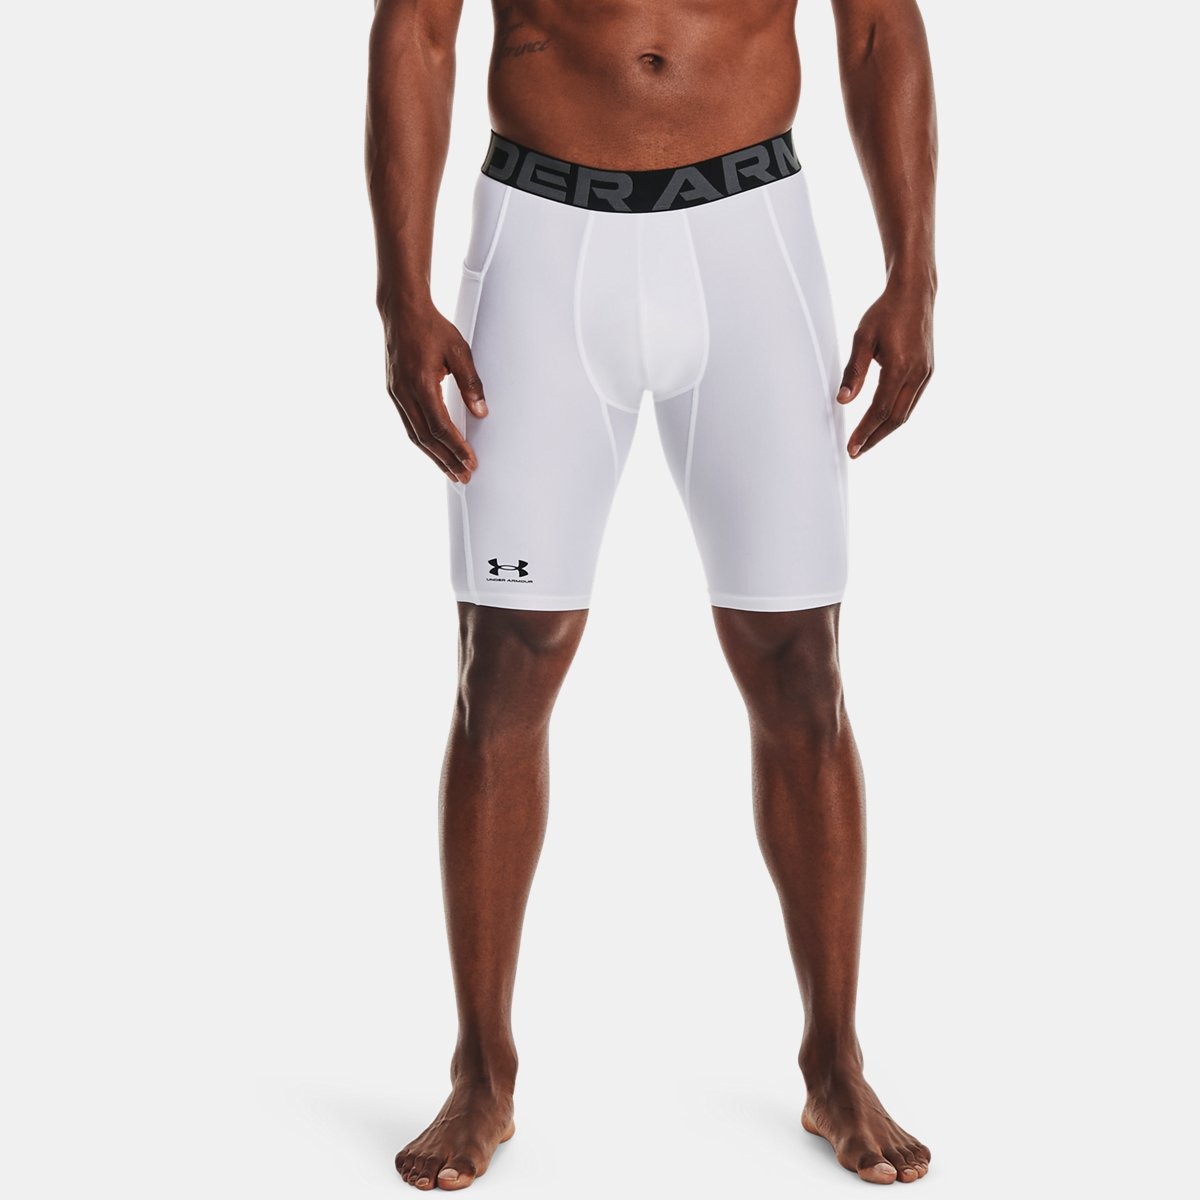 Shorts White for Man from Under Armour GOOFASH